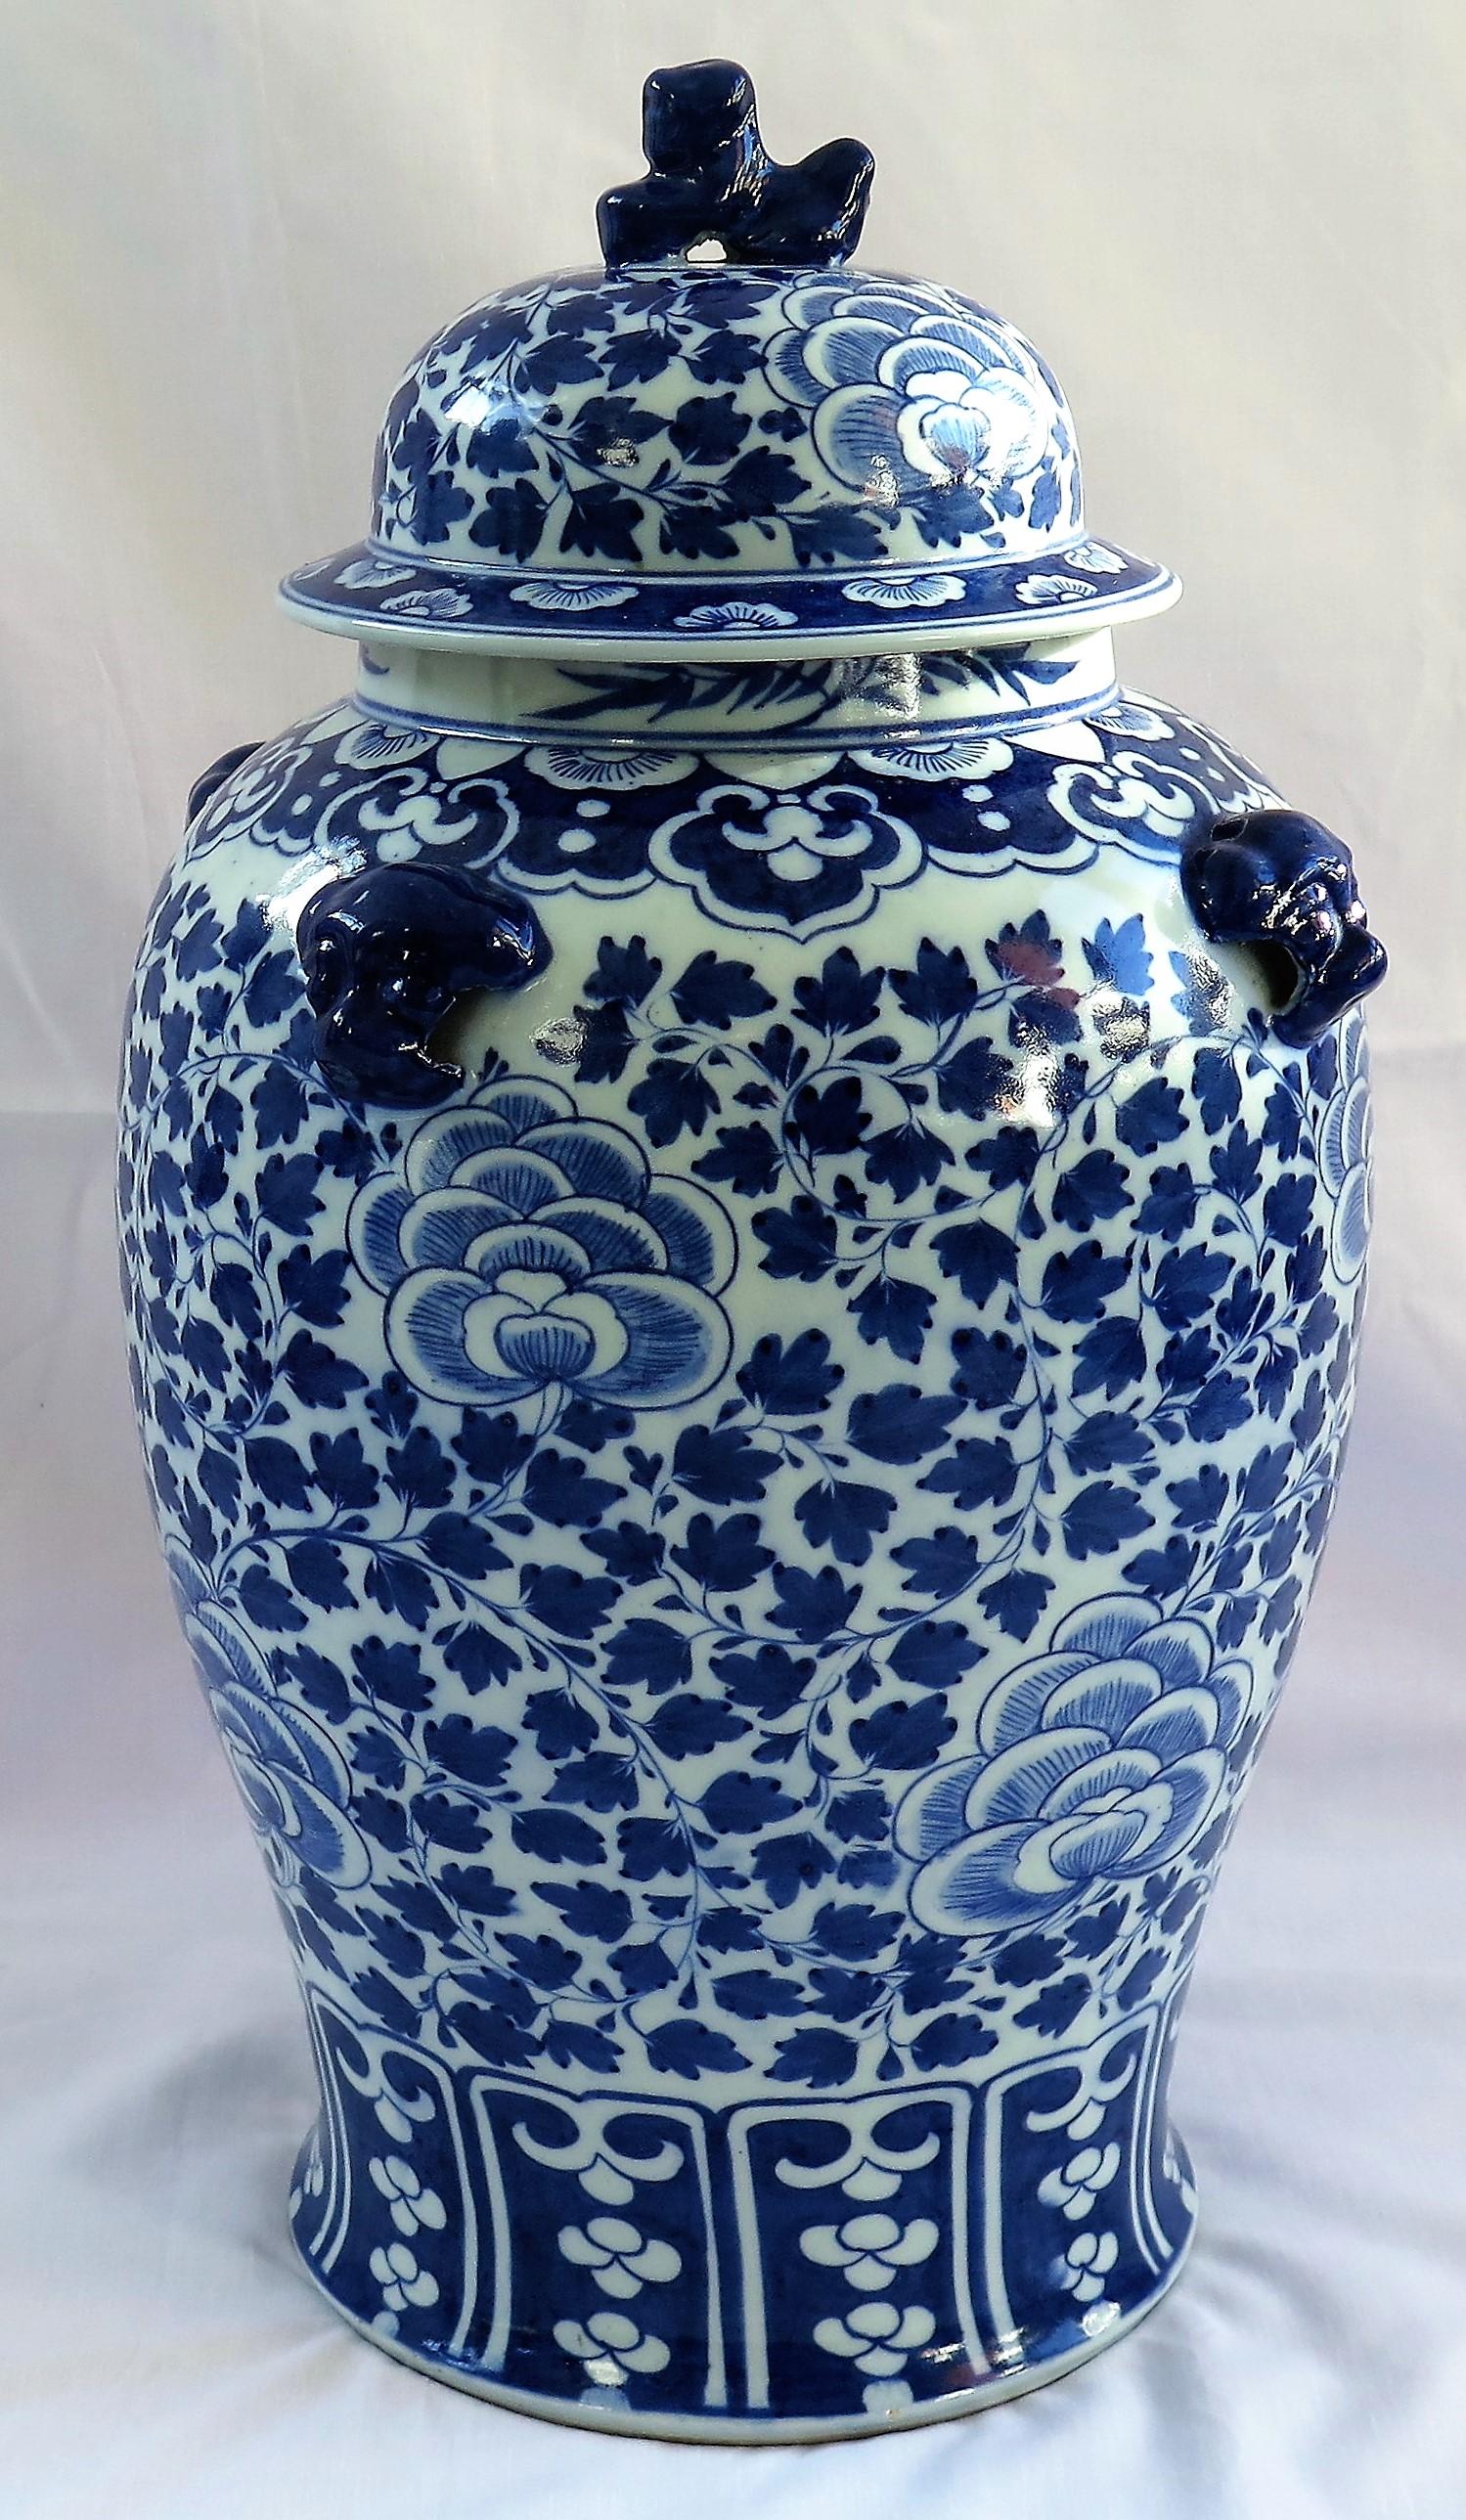 This is a beautiful large Chinese, blue and white porcelain lidded vase or Jar which we date to the late 19th century, Qing period.

The shade of blue on this vase is beautiful and very distinctive. 

The vase has a good baluster shape with four foo